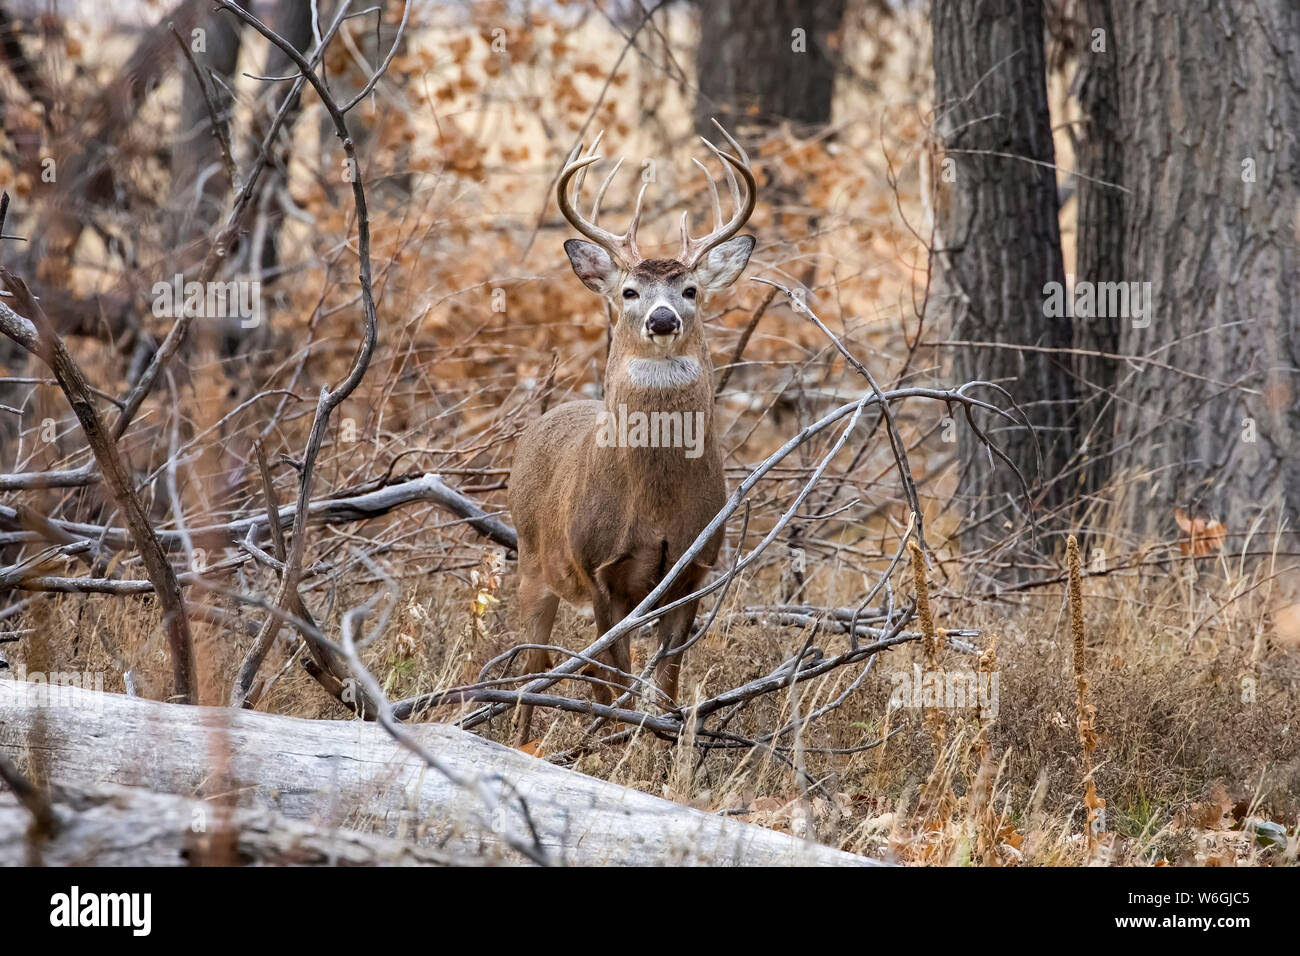 White-tailed deer (Odocoileus virginianus) buck standing in a forest in autumn; Denver, Colorado, United States of America Stock Photo